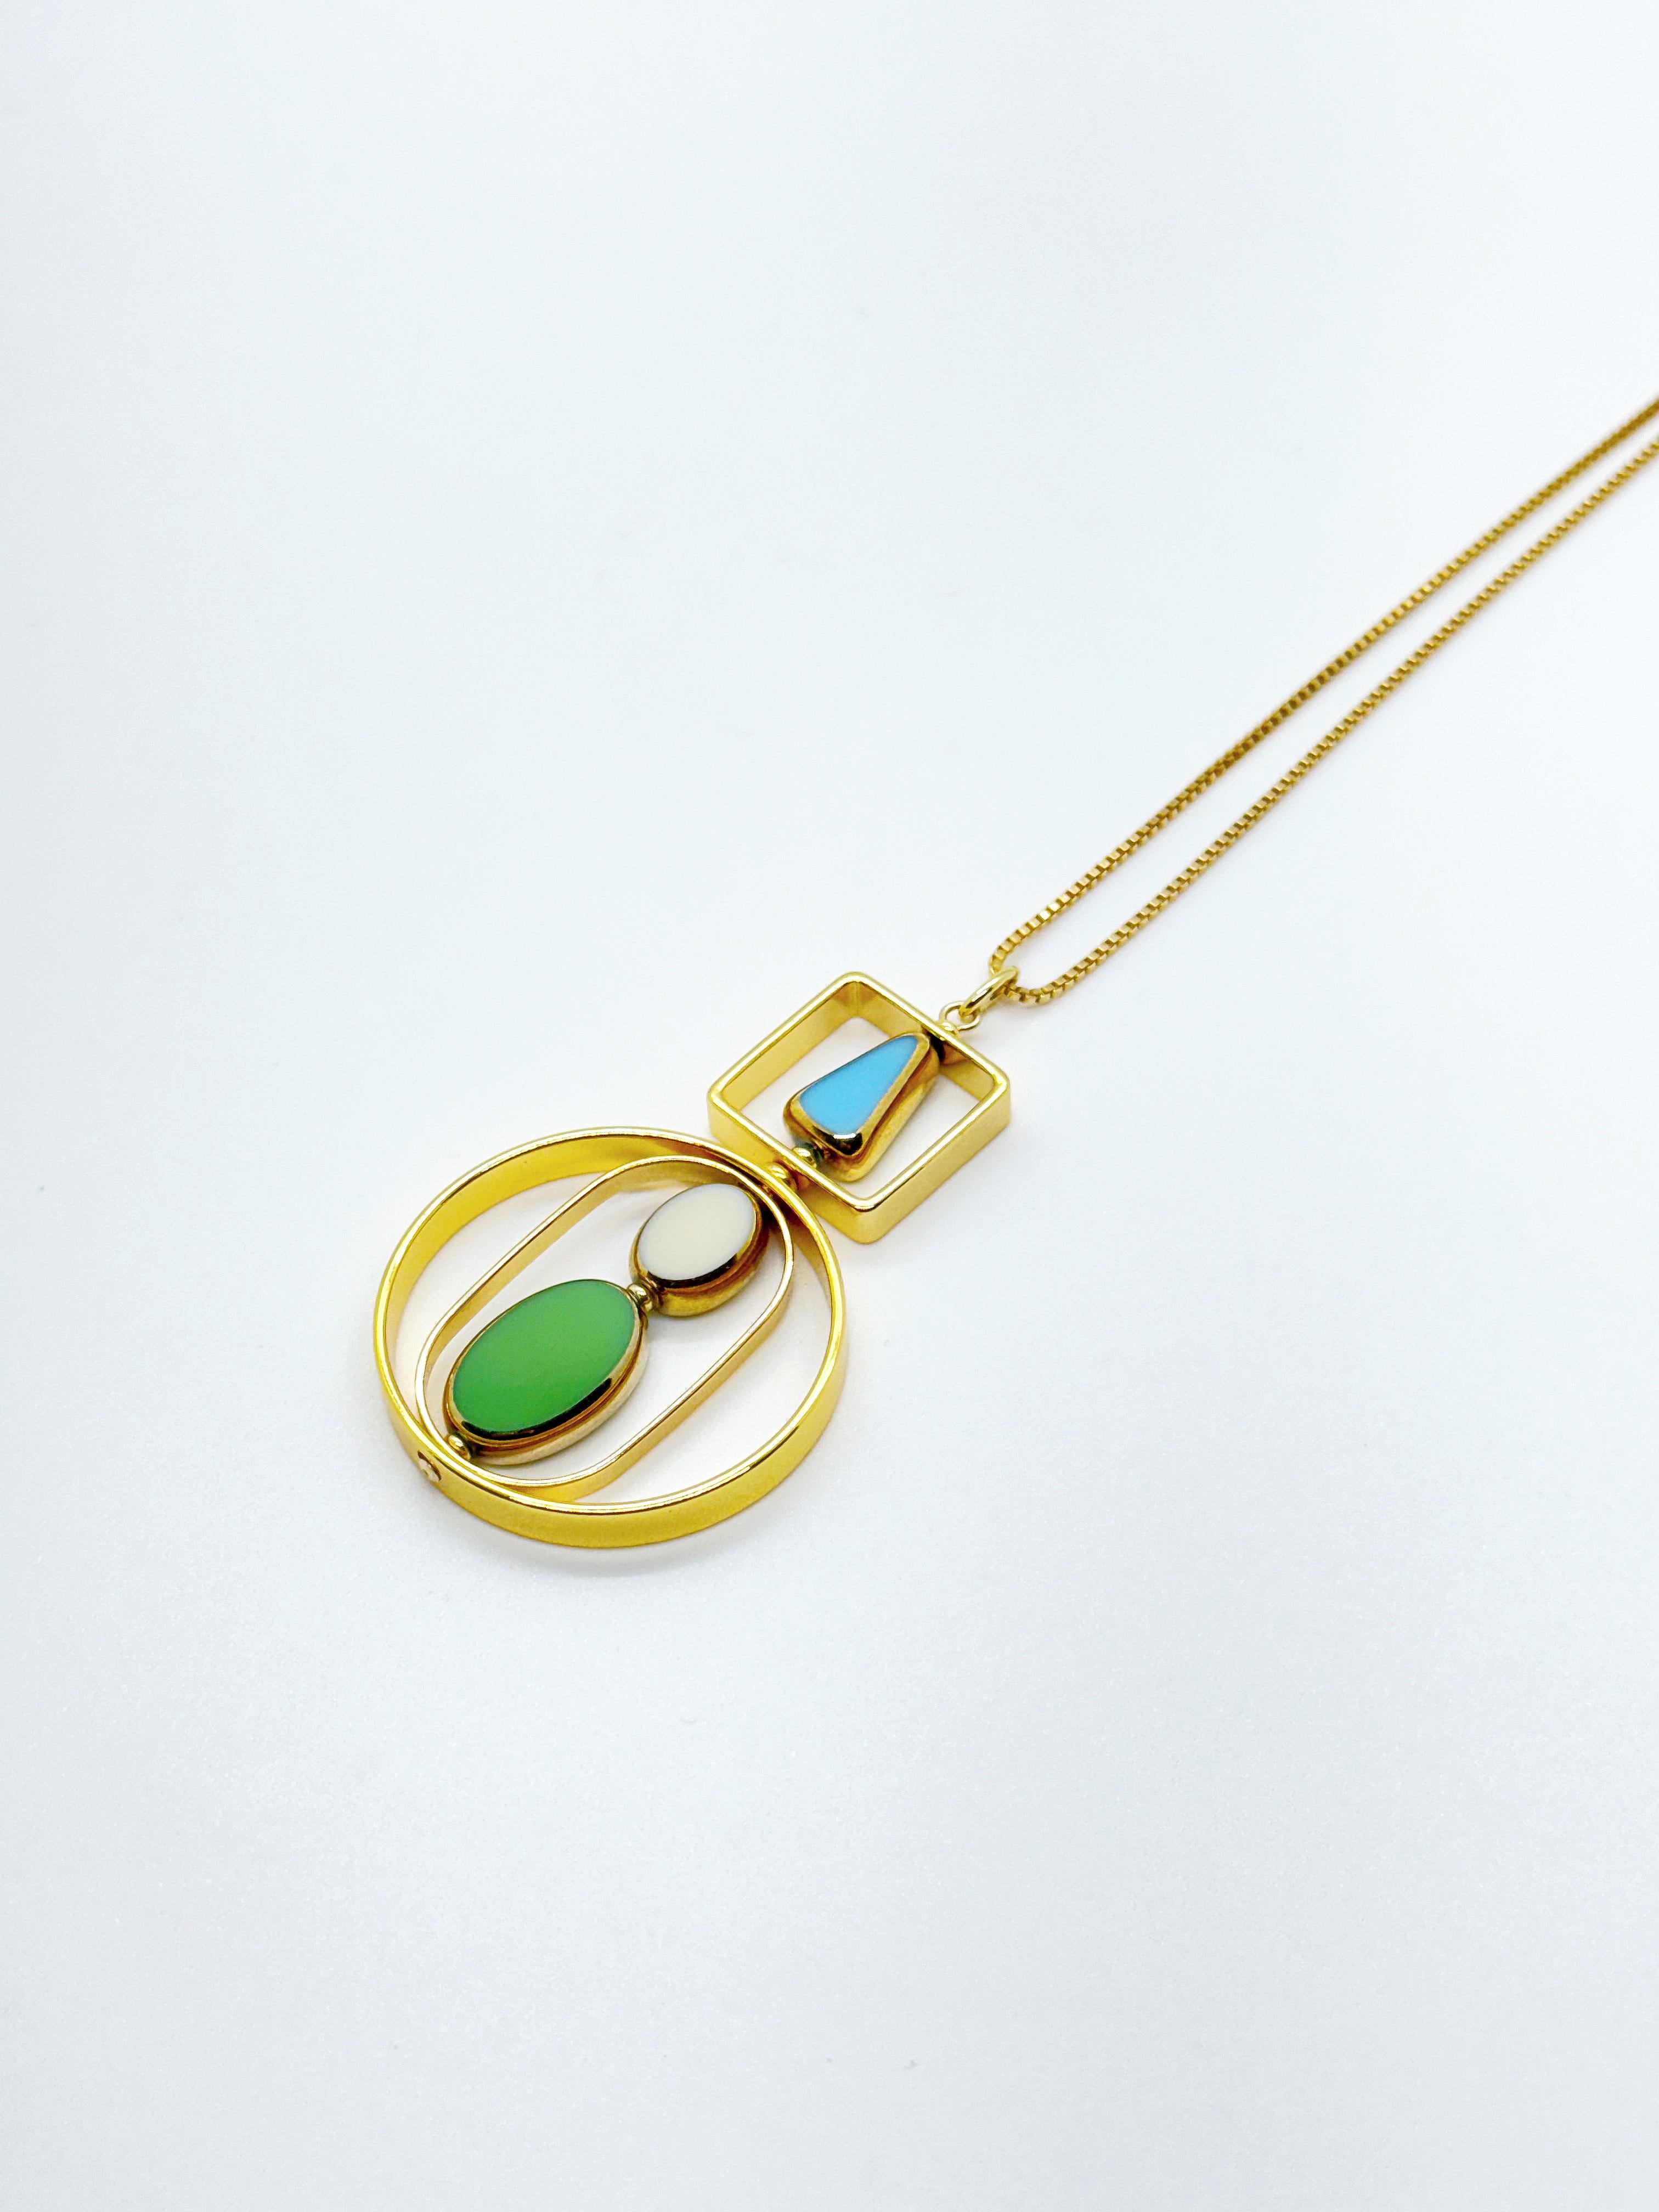 The pendant consists of baby blue, beige, and green vintage German glass beads and is finished with an 18-inch gold-filled chain. 

The beads are new old stock vintage German glass beads that are framed with 24K gold. The beads were hand pressed